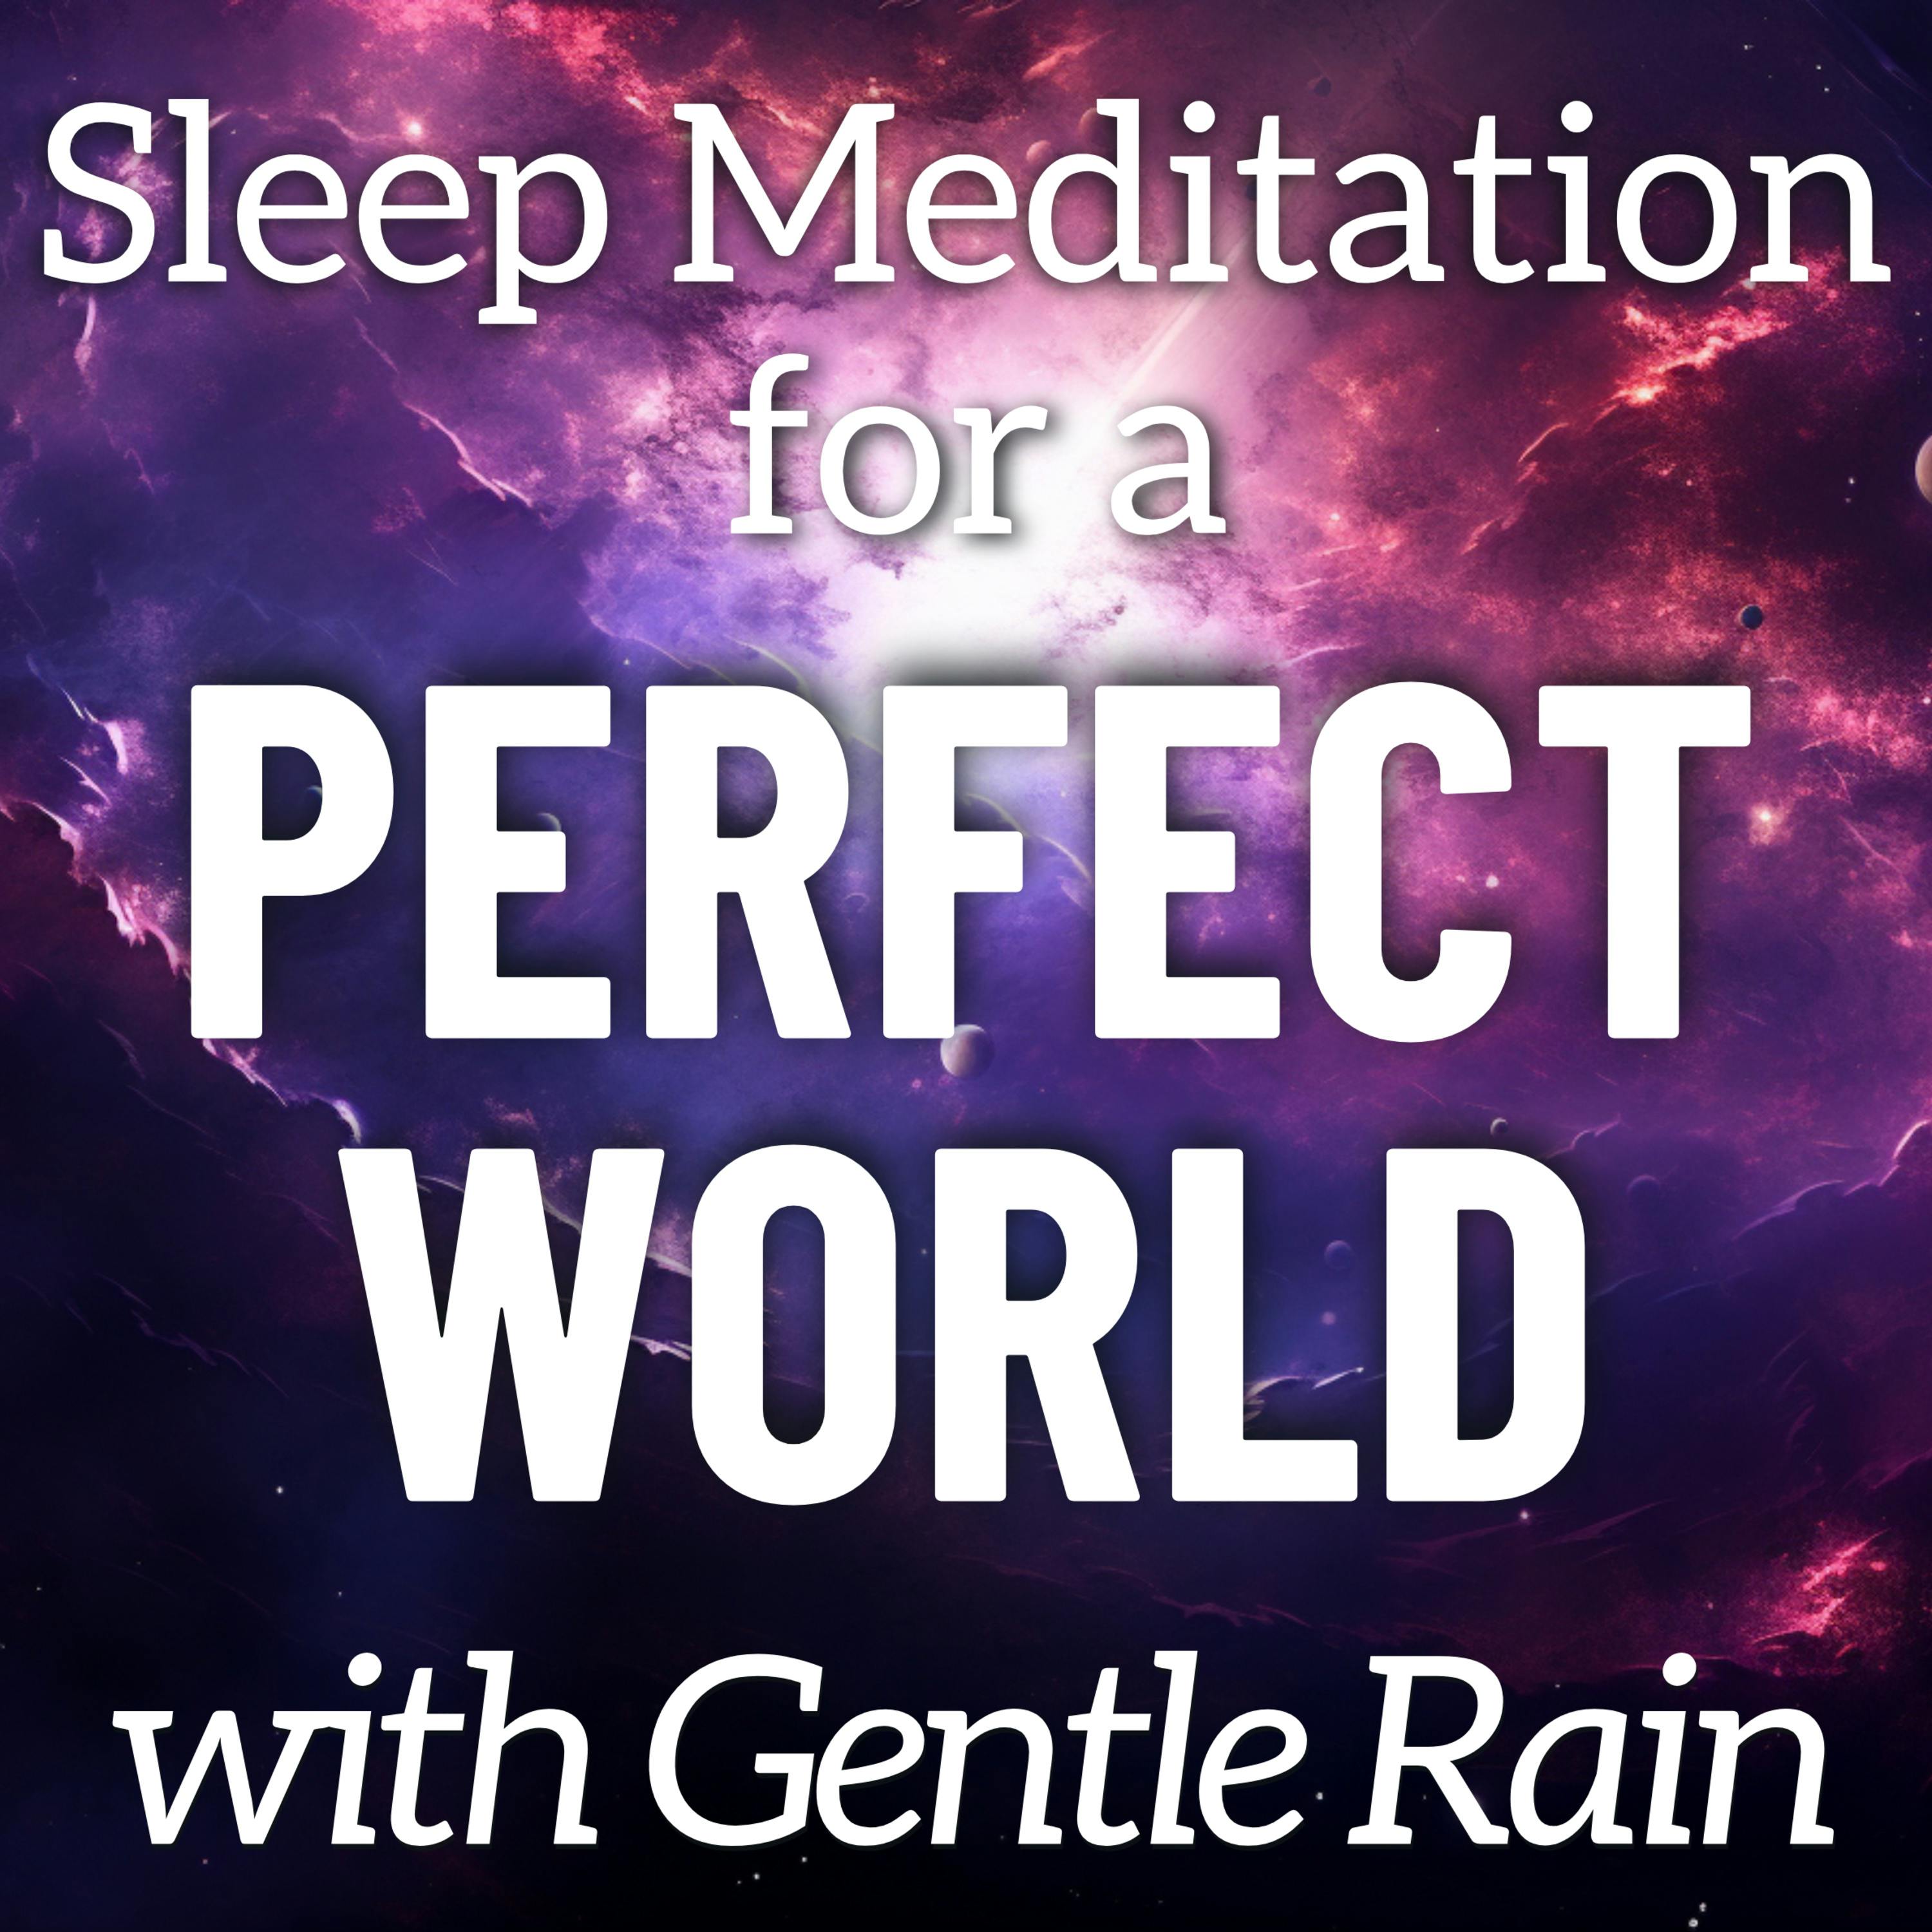 Sleep Meditation to Imagine a Perfect World - with the Sound of Gentle Rainfall